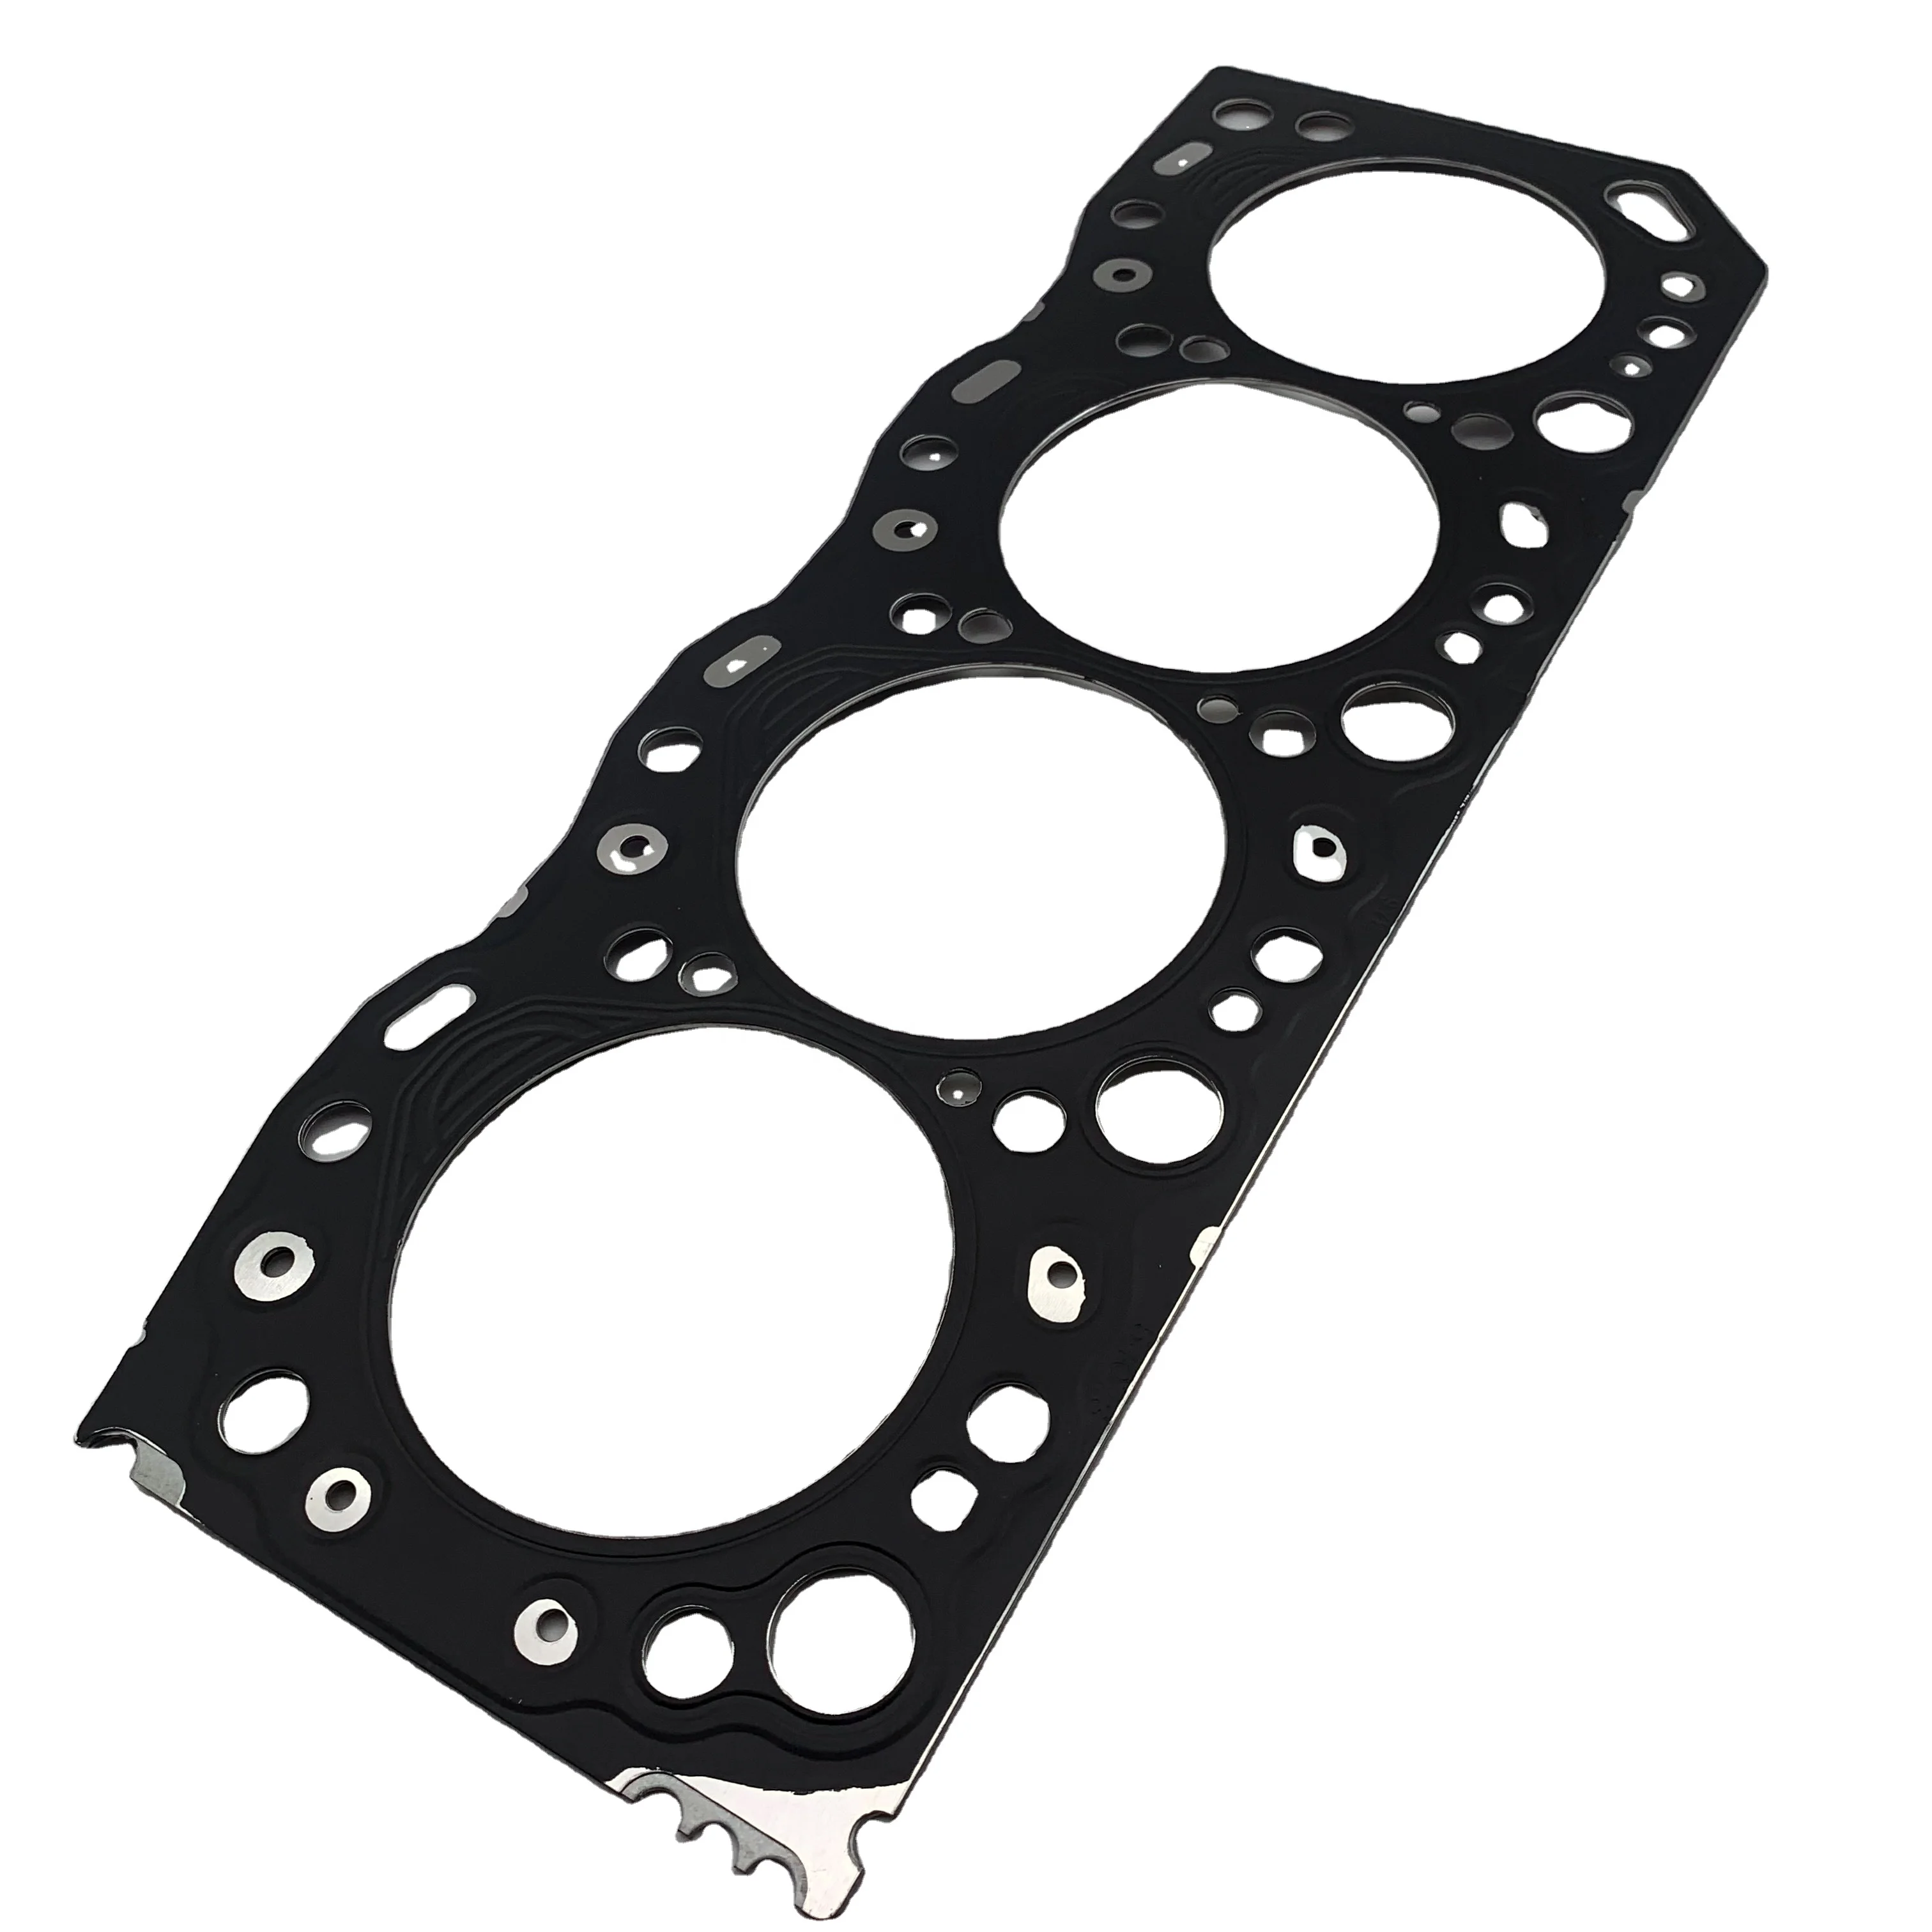 Wholesale 2L Engine Cylinder Head Gasket For HILUX HIACE LAND CRUISER DYNA  Other Auto Engine Parts 11115-54084-FO From m.alibaba.com